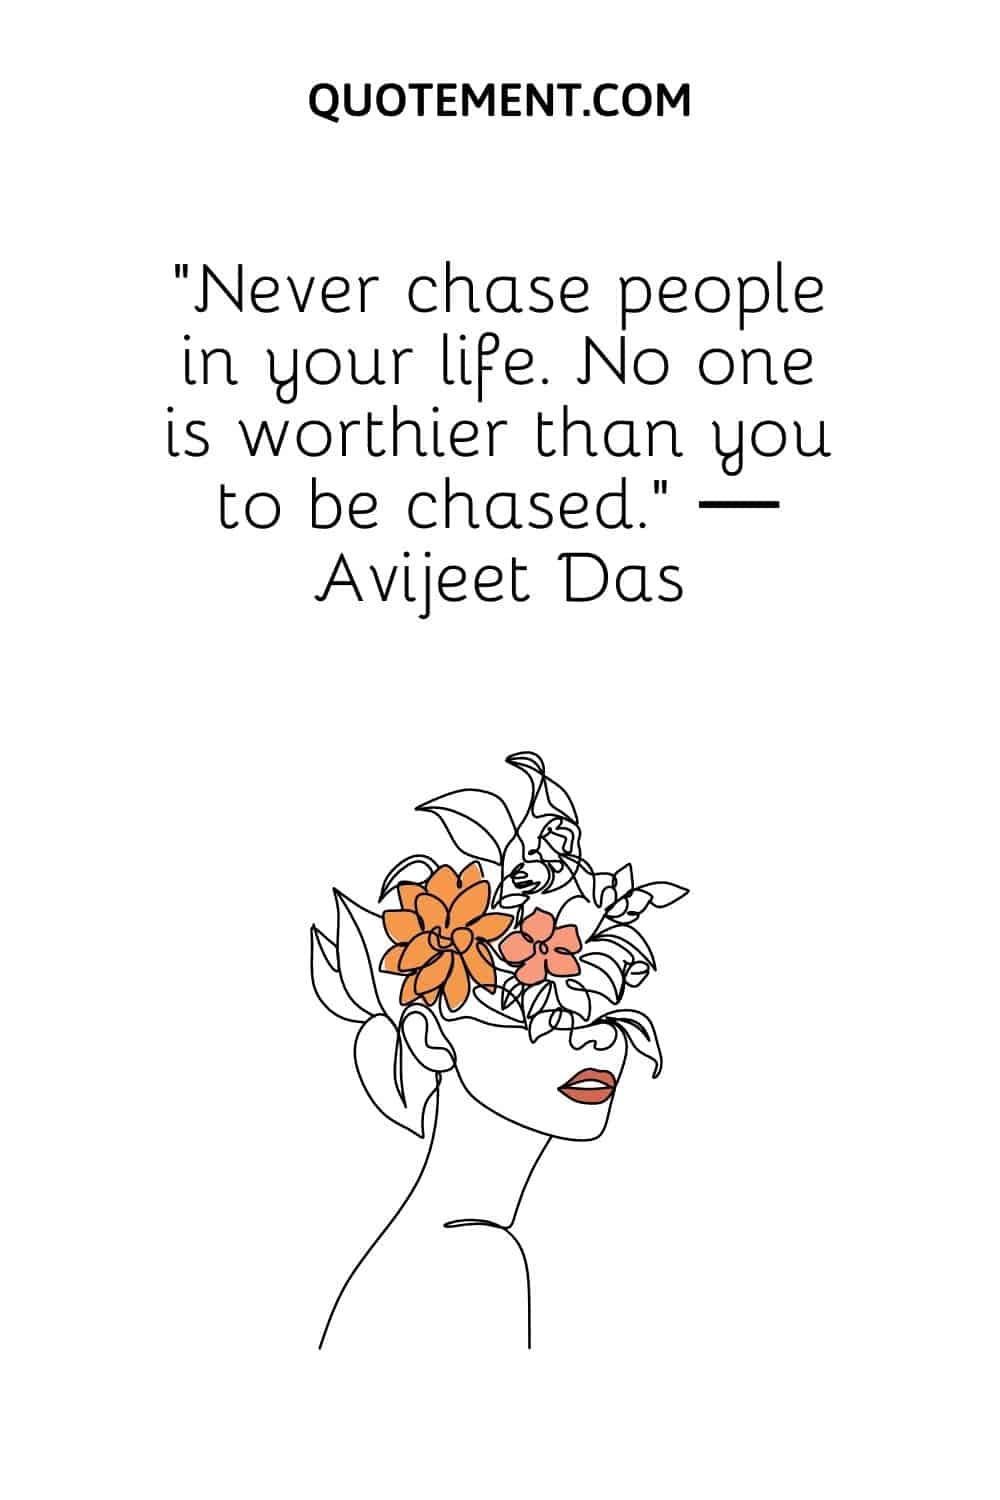 Never chase people in your life. No one is worthier than you to be chased